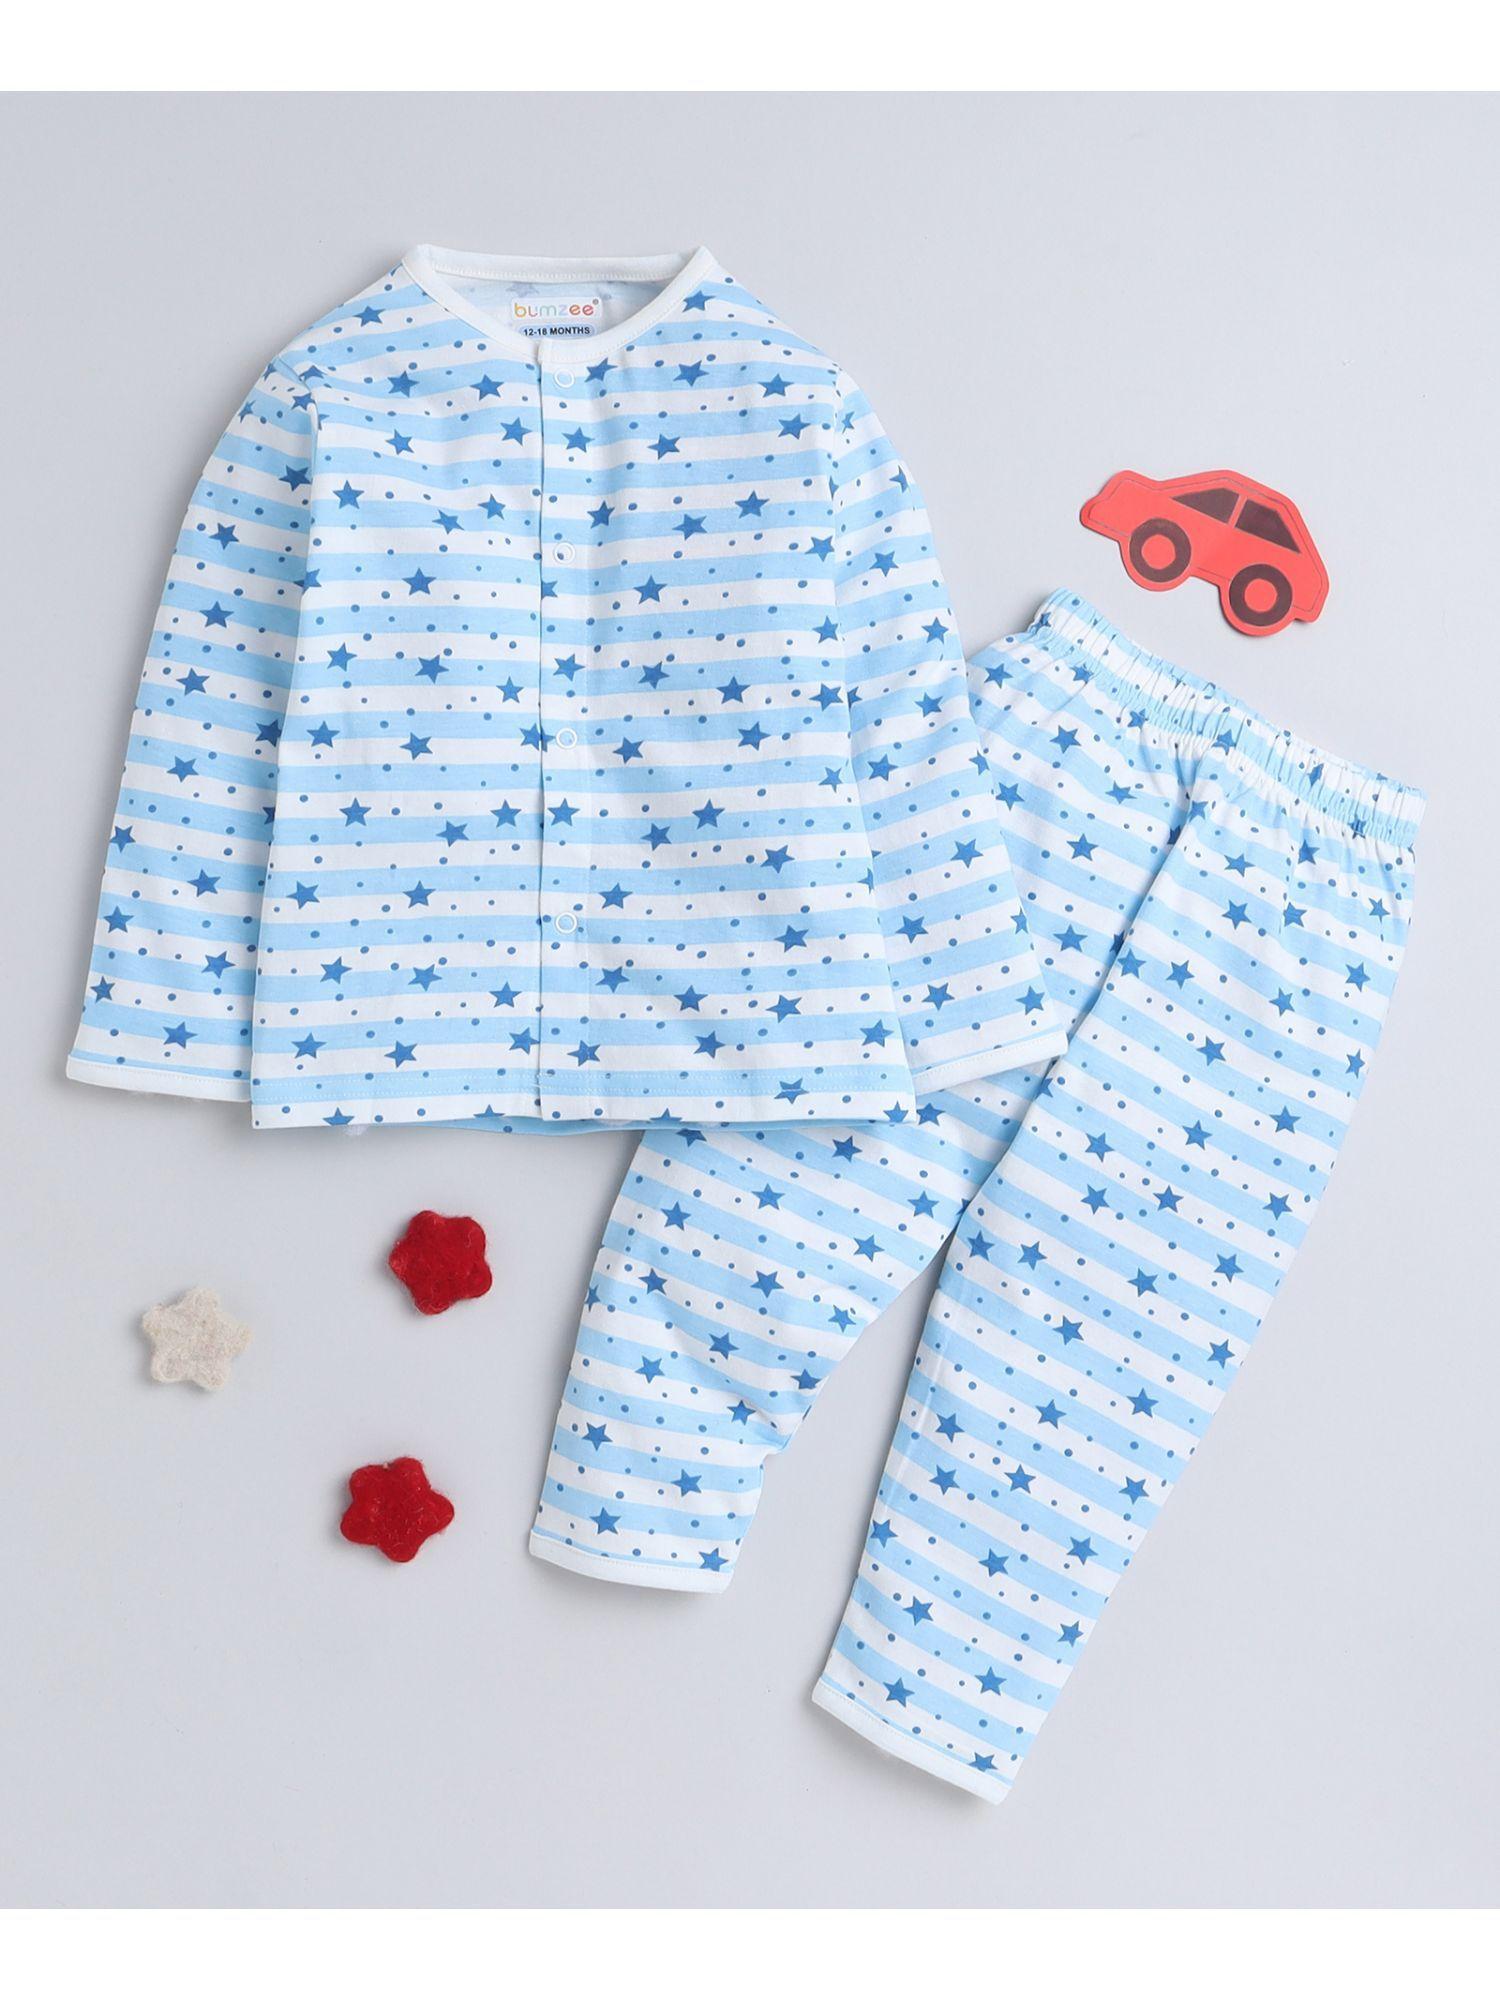 white-and-blue-boys-full-sleeves-cotton-night-suit-(set-of-2)